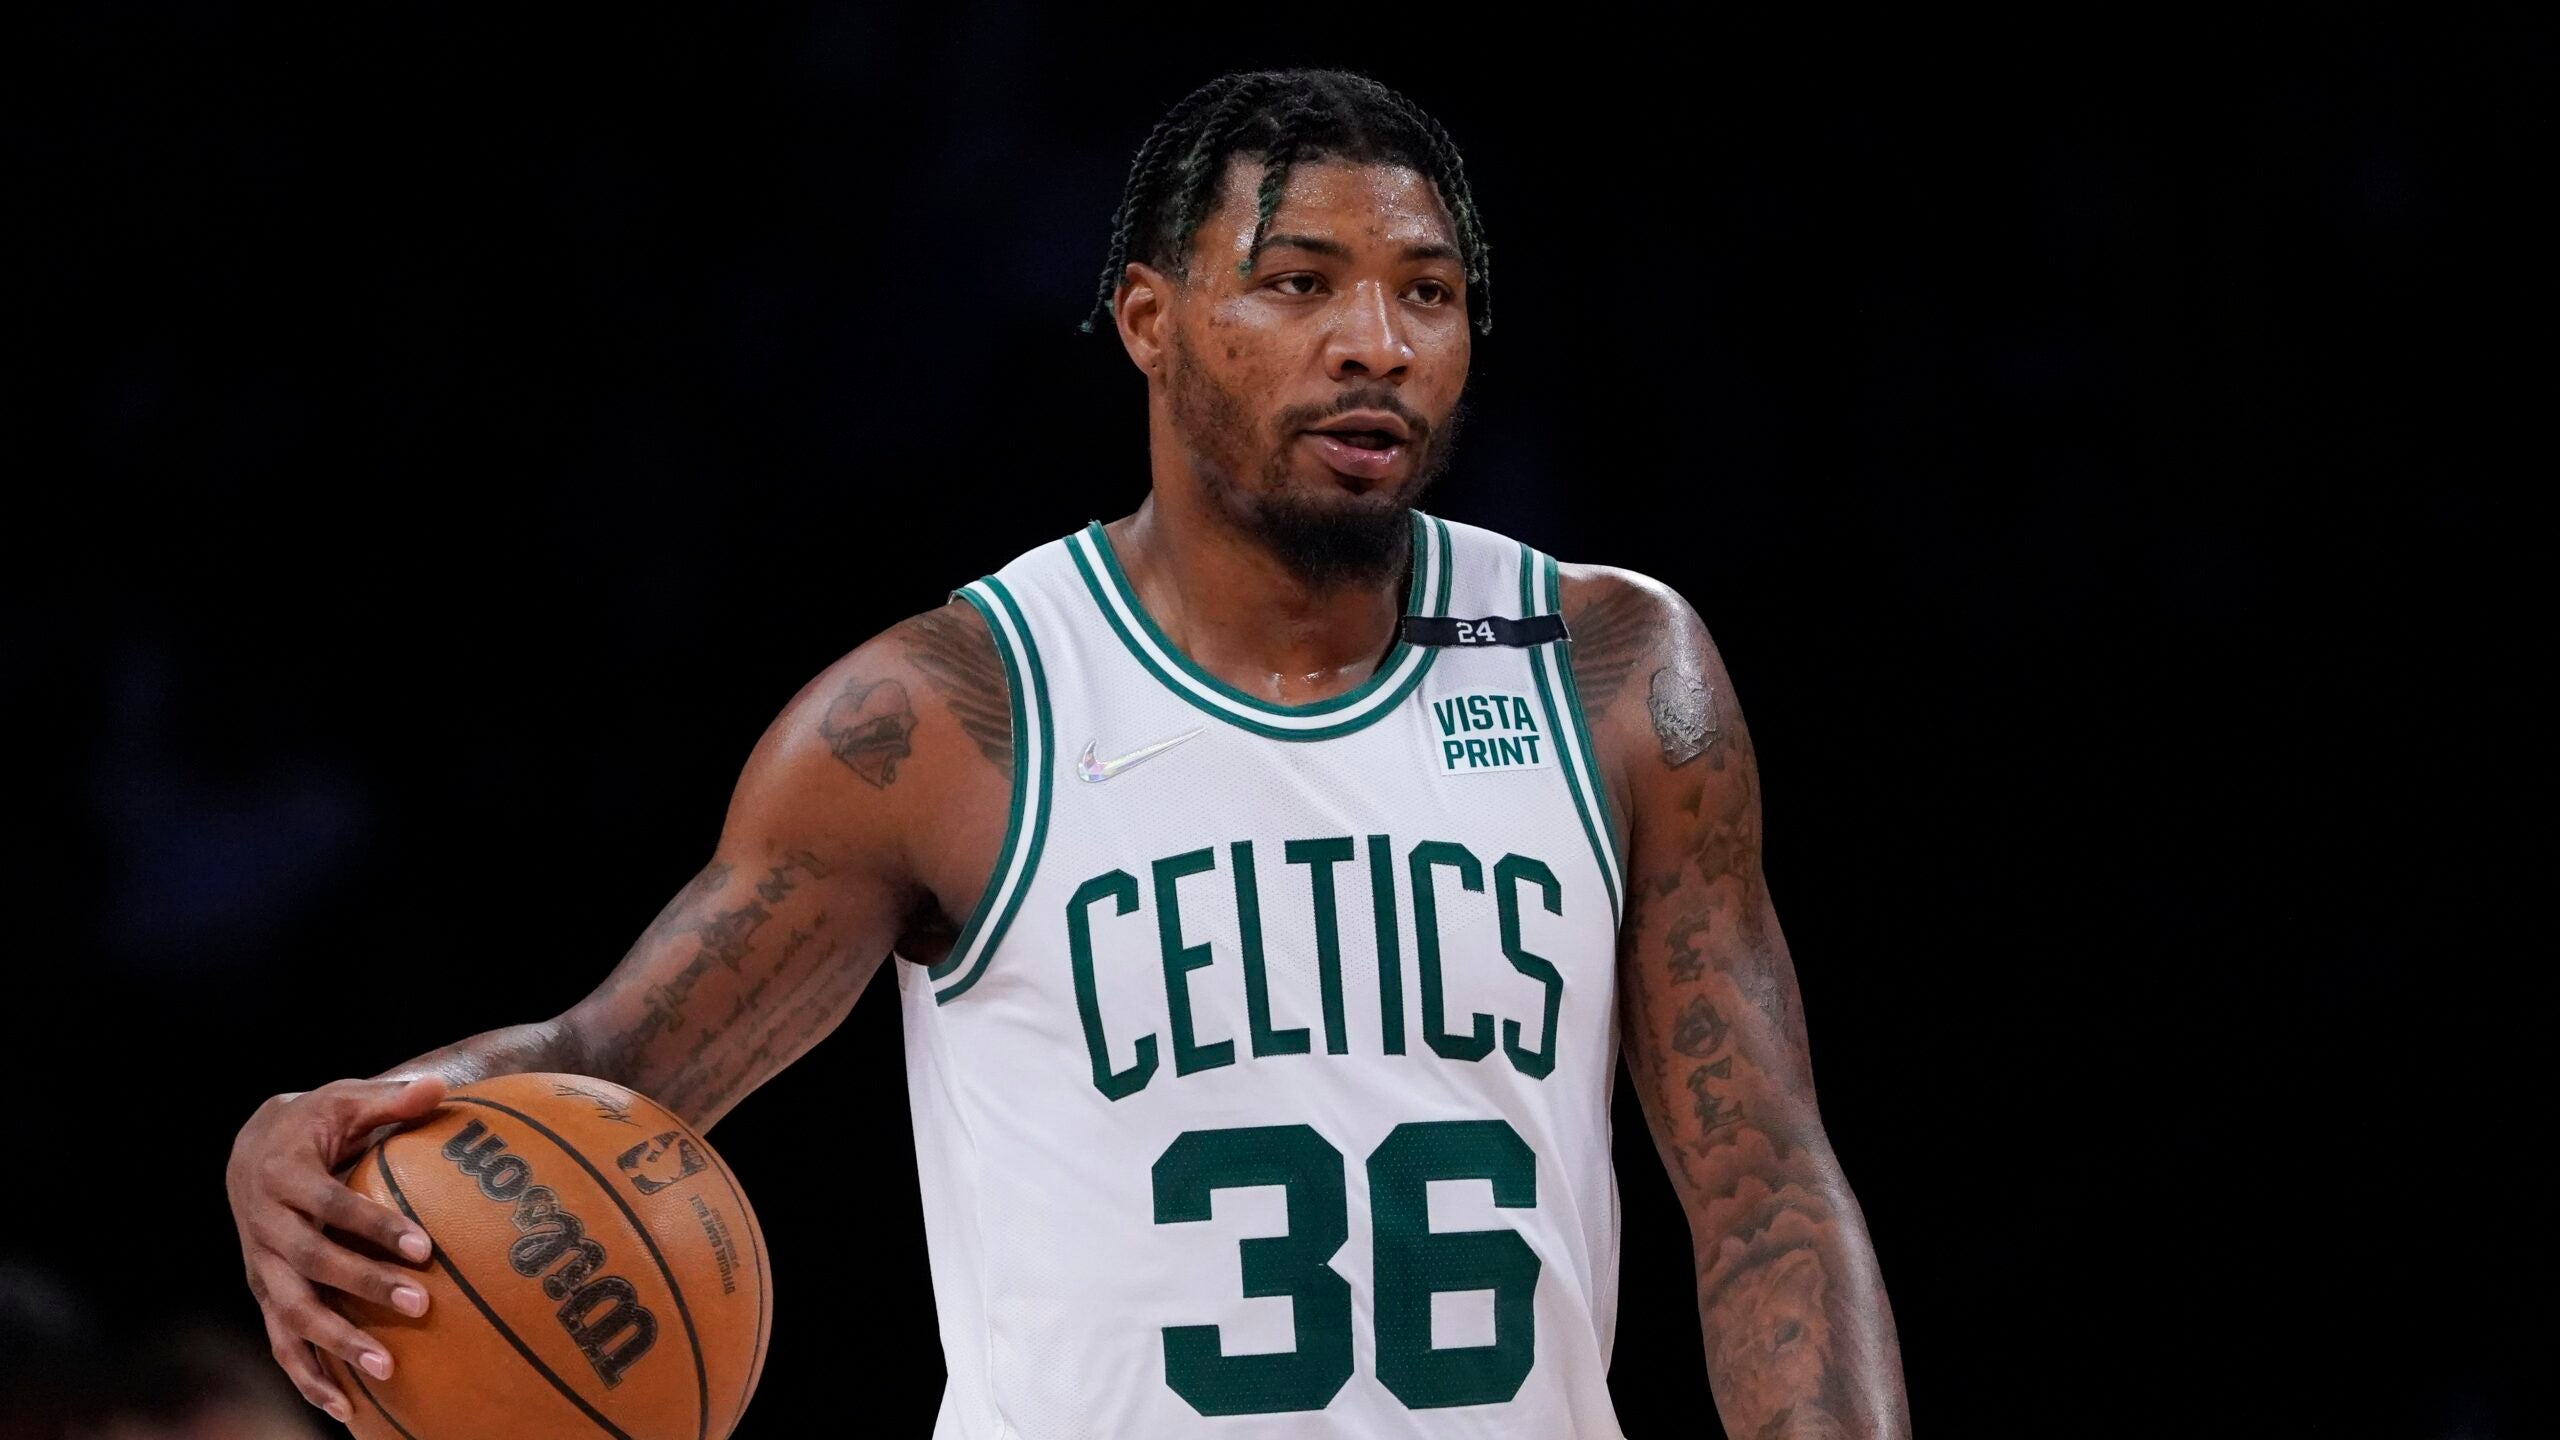 Marcus Smart: “Everybody's confidence is going up” - CelticsBlog